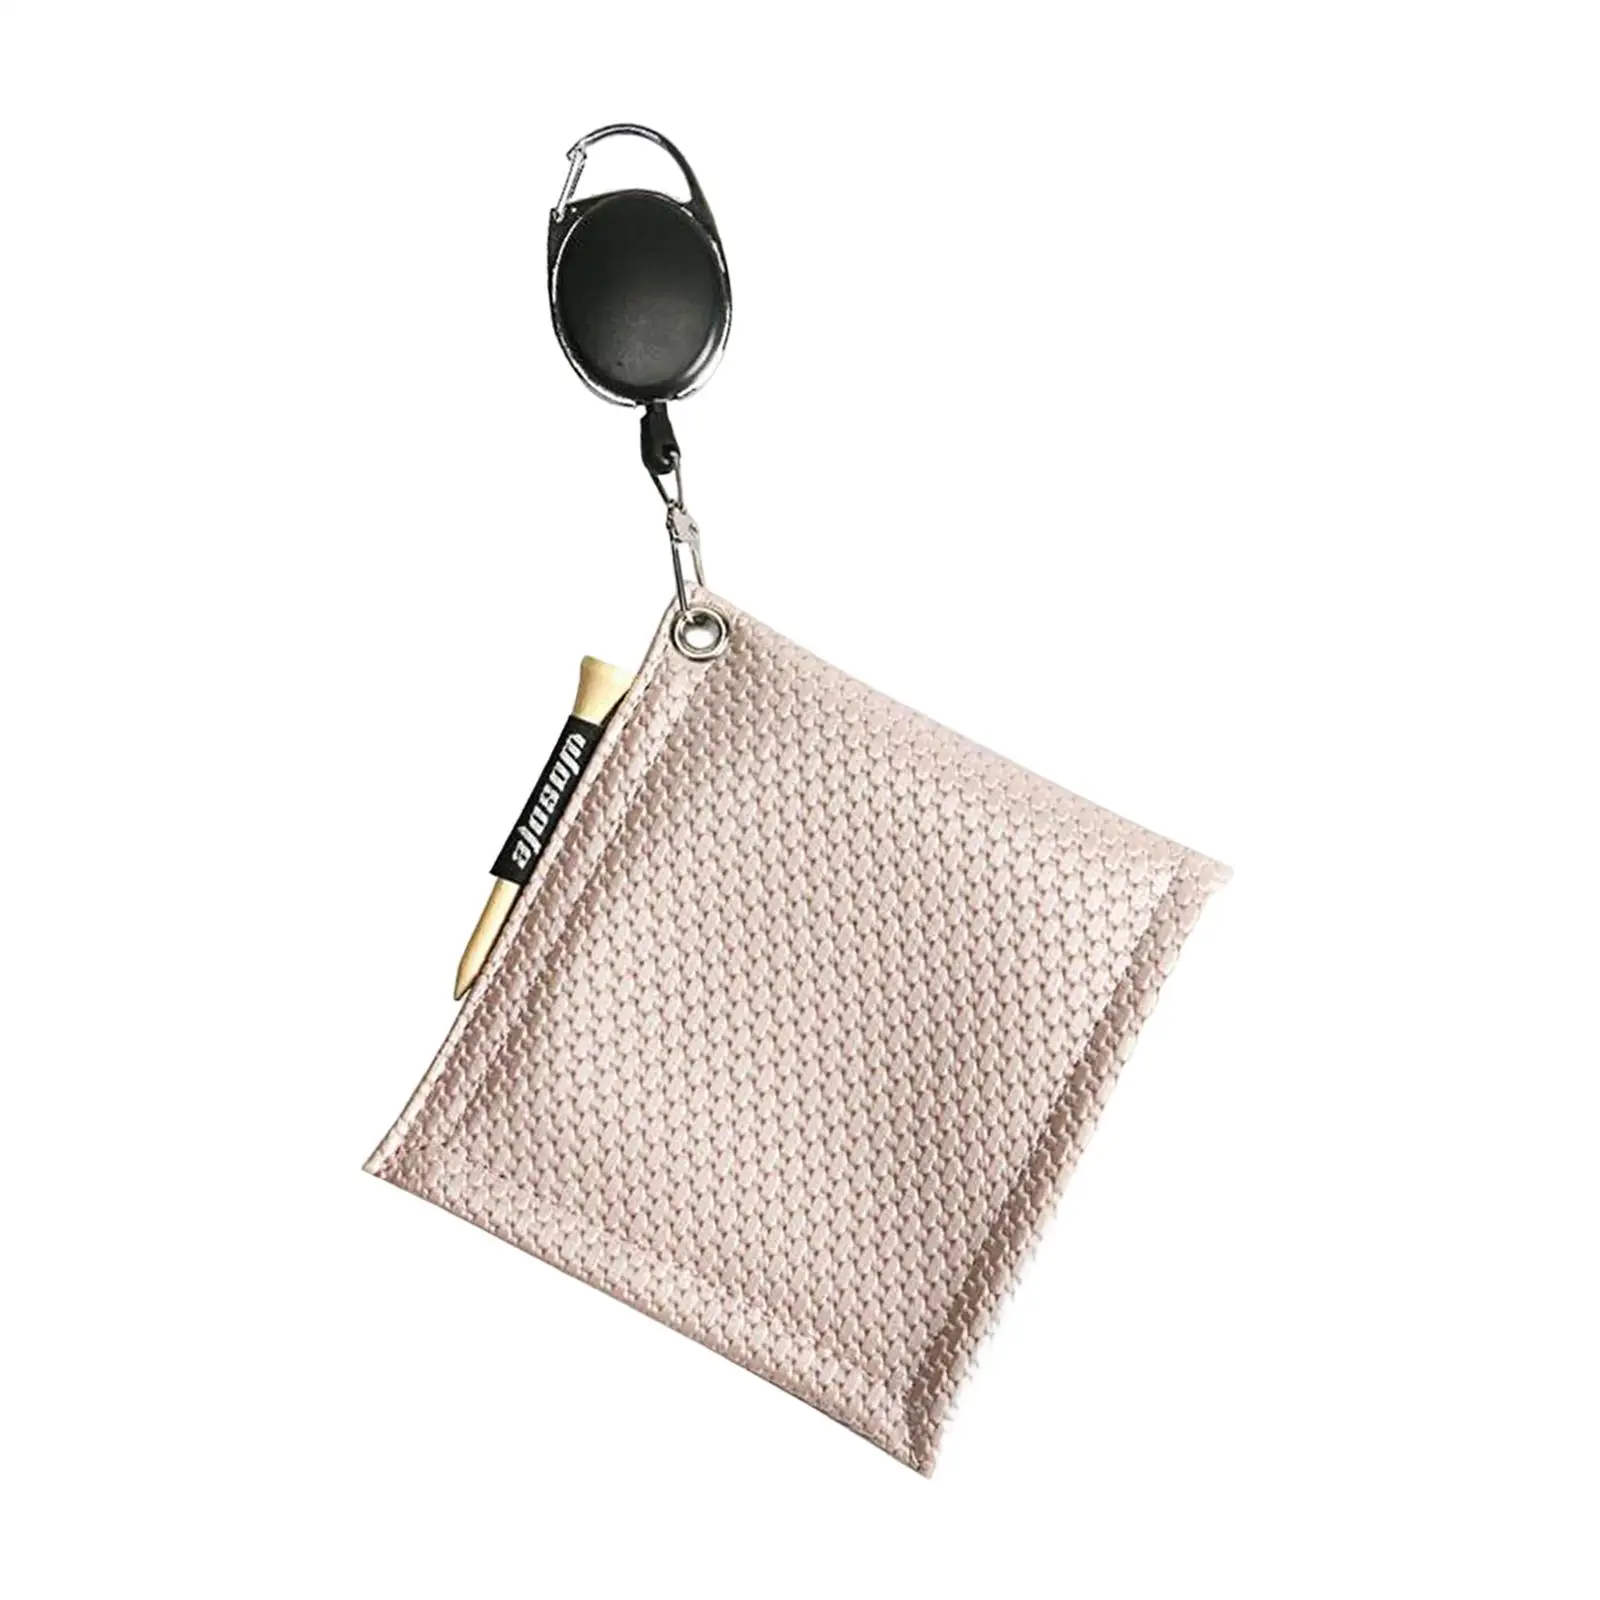 Golf Ball Cleaning Towels, Cleaner Golf Club Head Wiping Cloth with Retractable Keychain Buckle Golf Ball Wipe for Golf Course